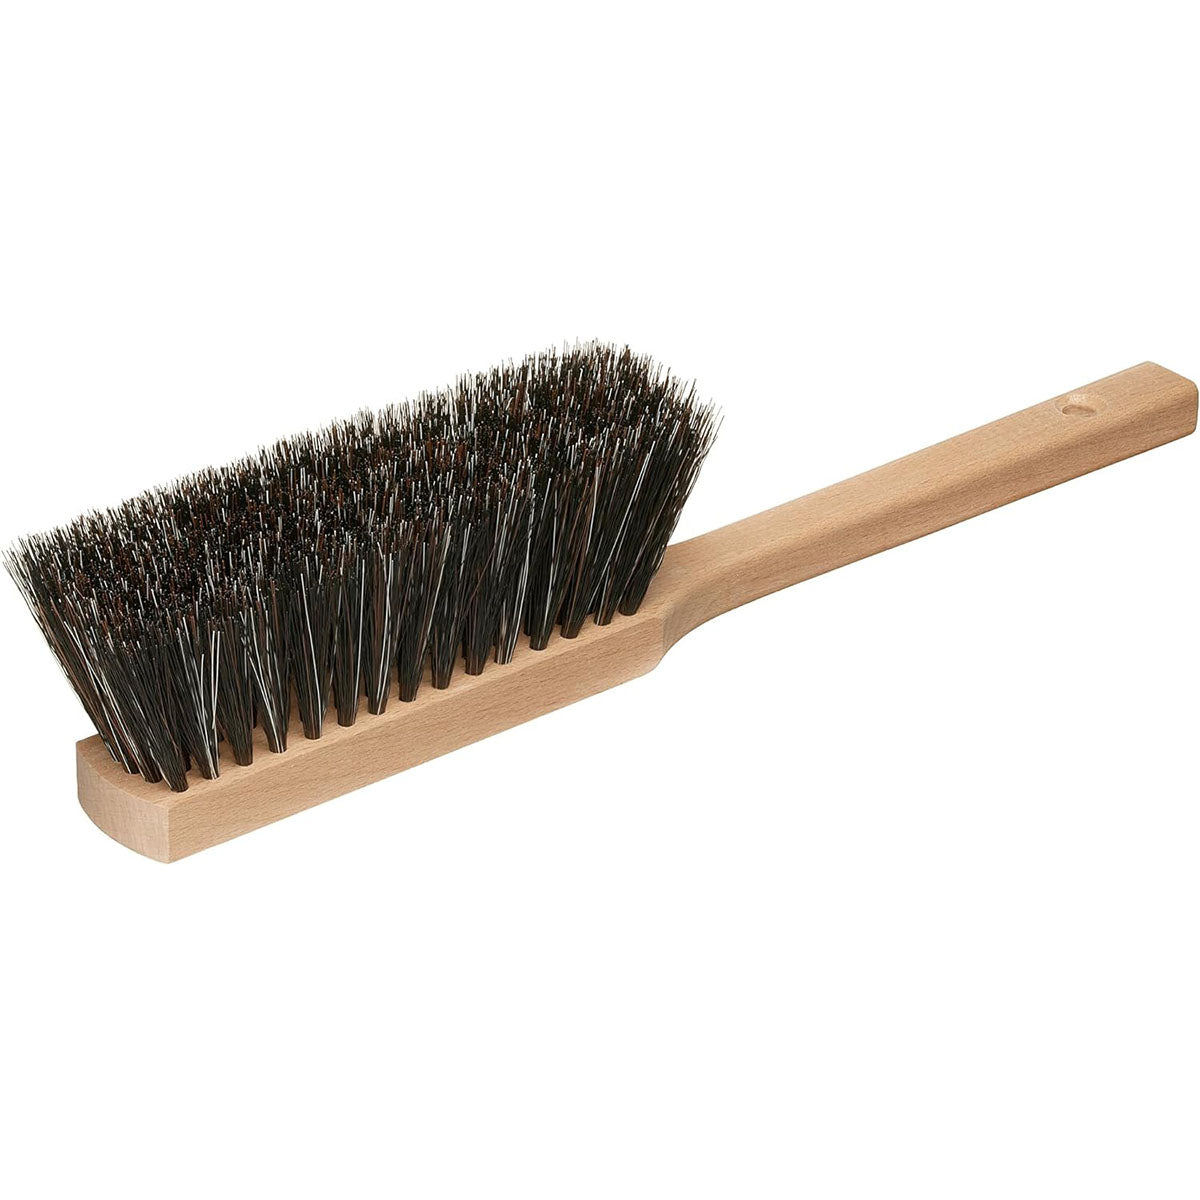 14.2" Hand Broom Soft Bristles Cleaning Brush, Dusting Brush with Wooden Handle